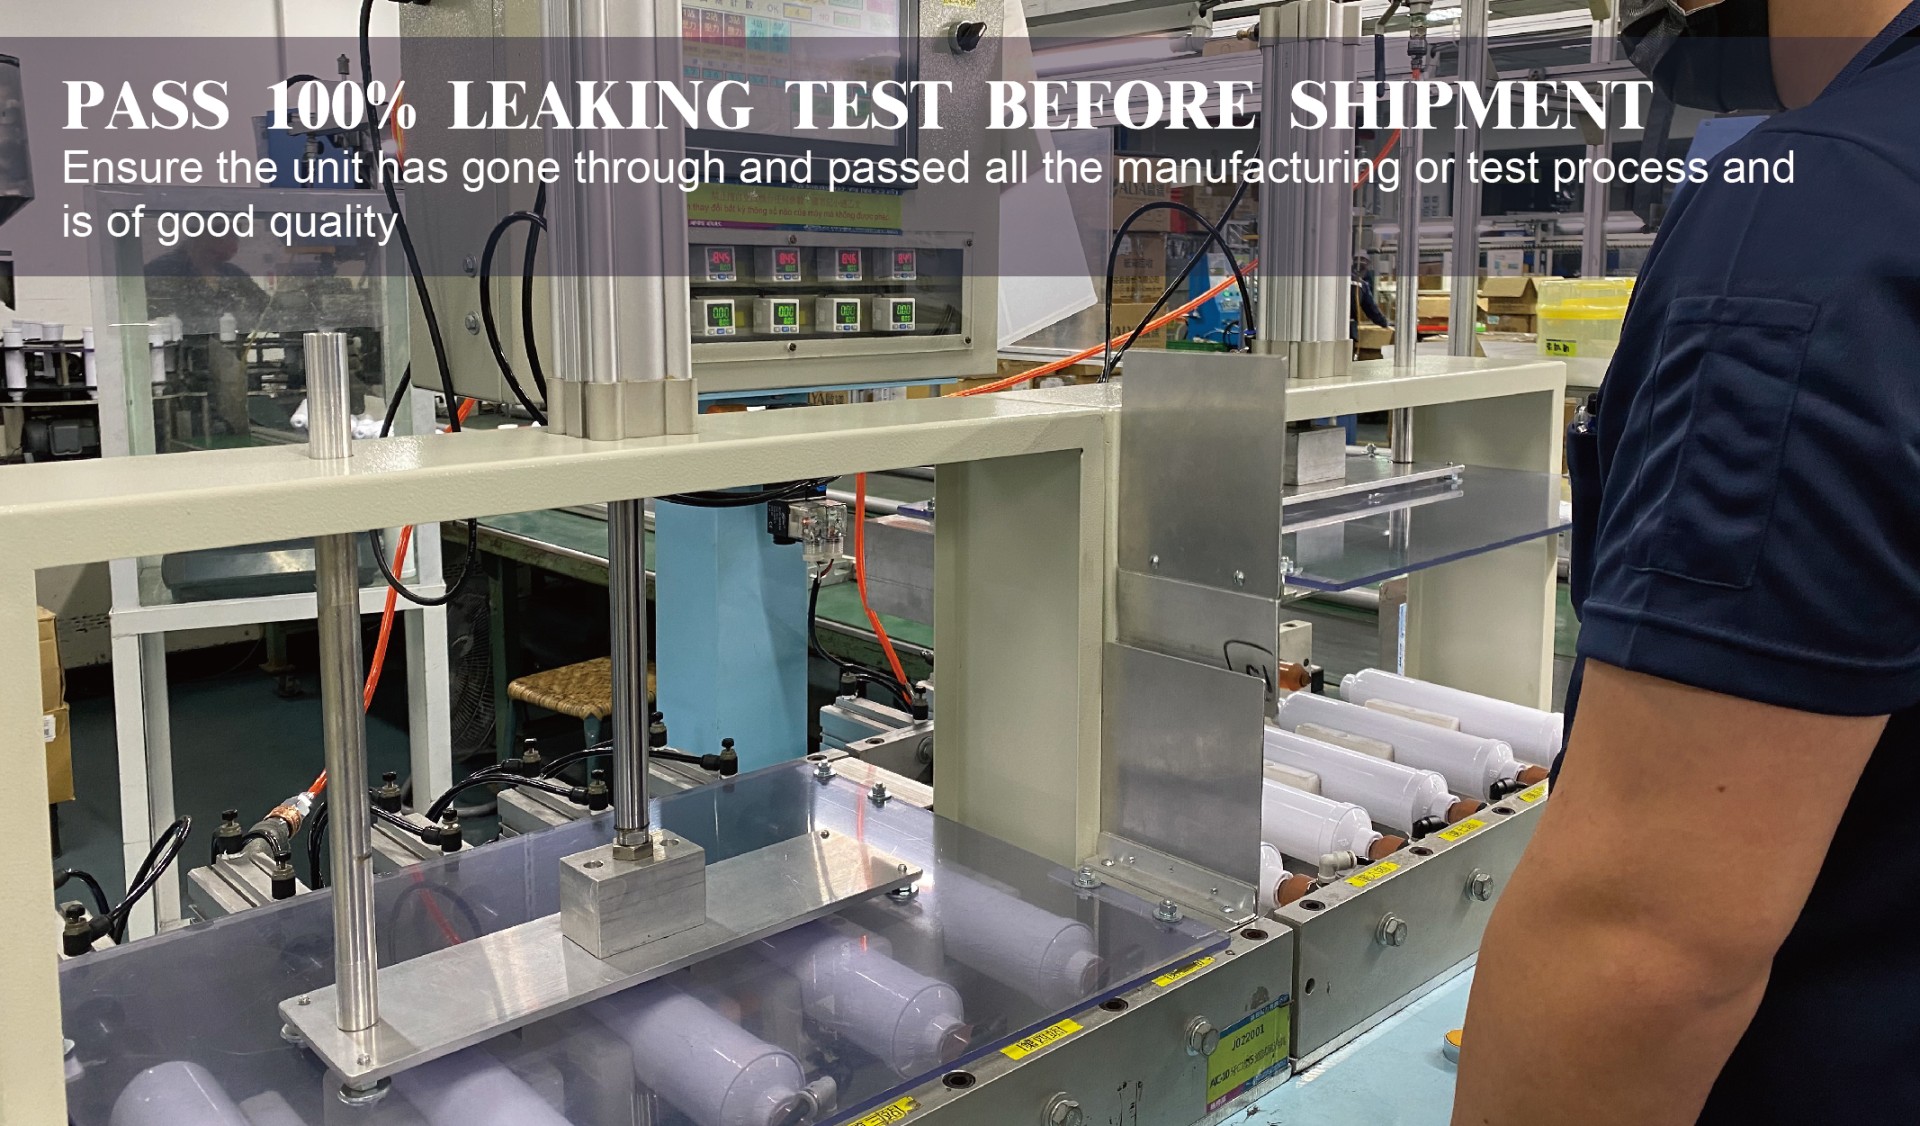 PASS 100% LEAKING TEST BEFORES SHIPMENT